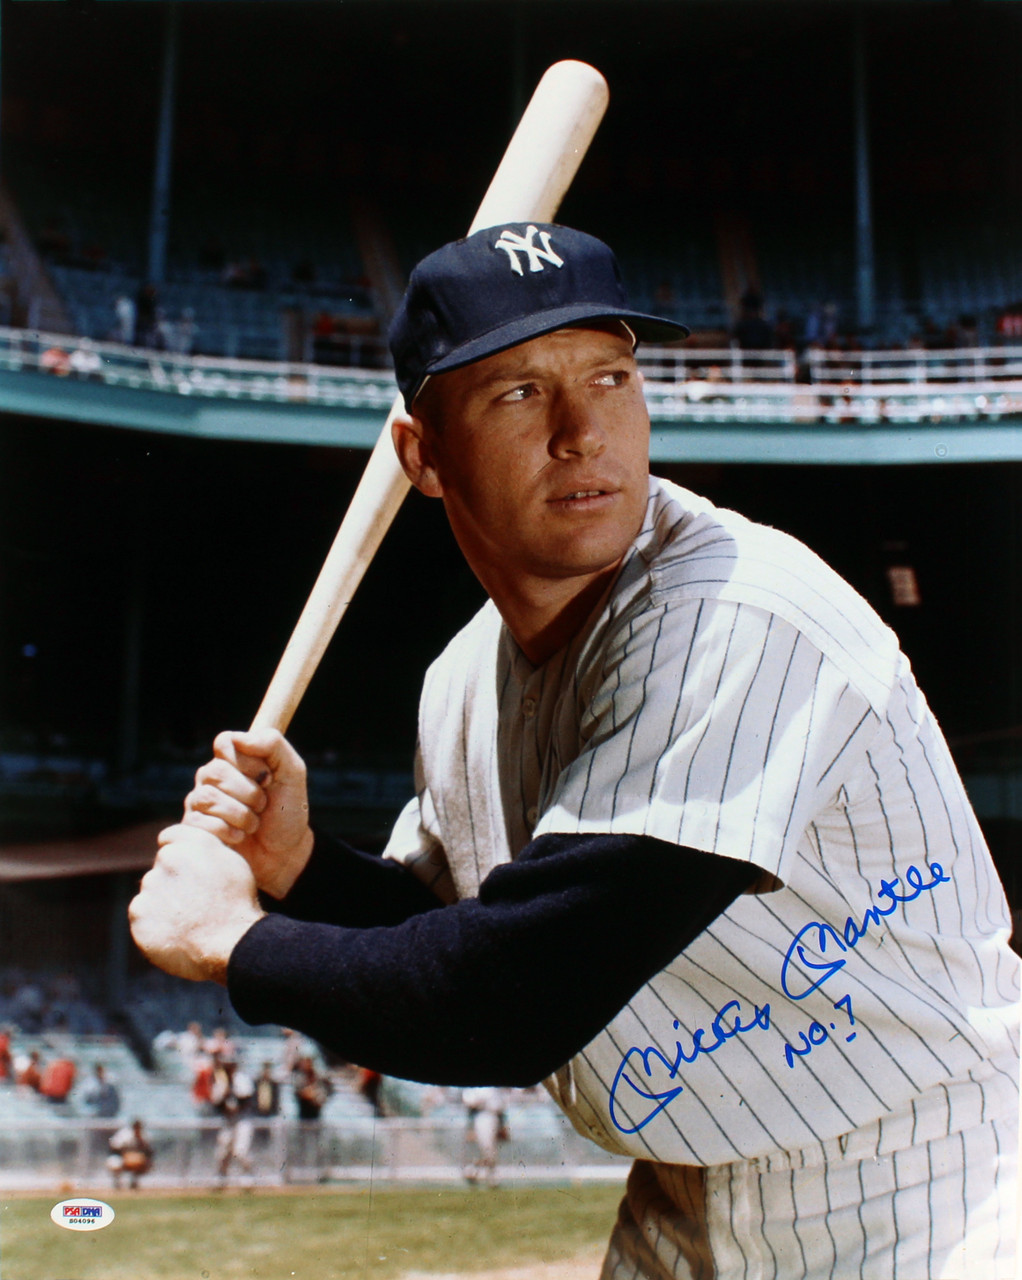 Yankees Mickey Mantle No. 7 Authentic Signed 16x20 Photo PSA